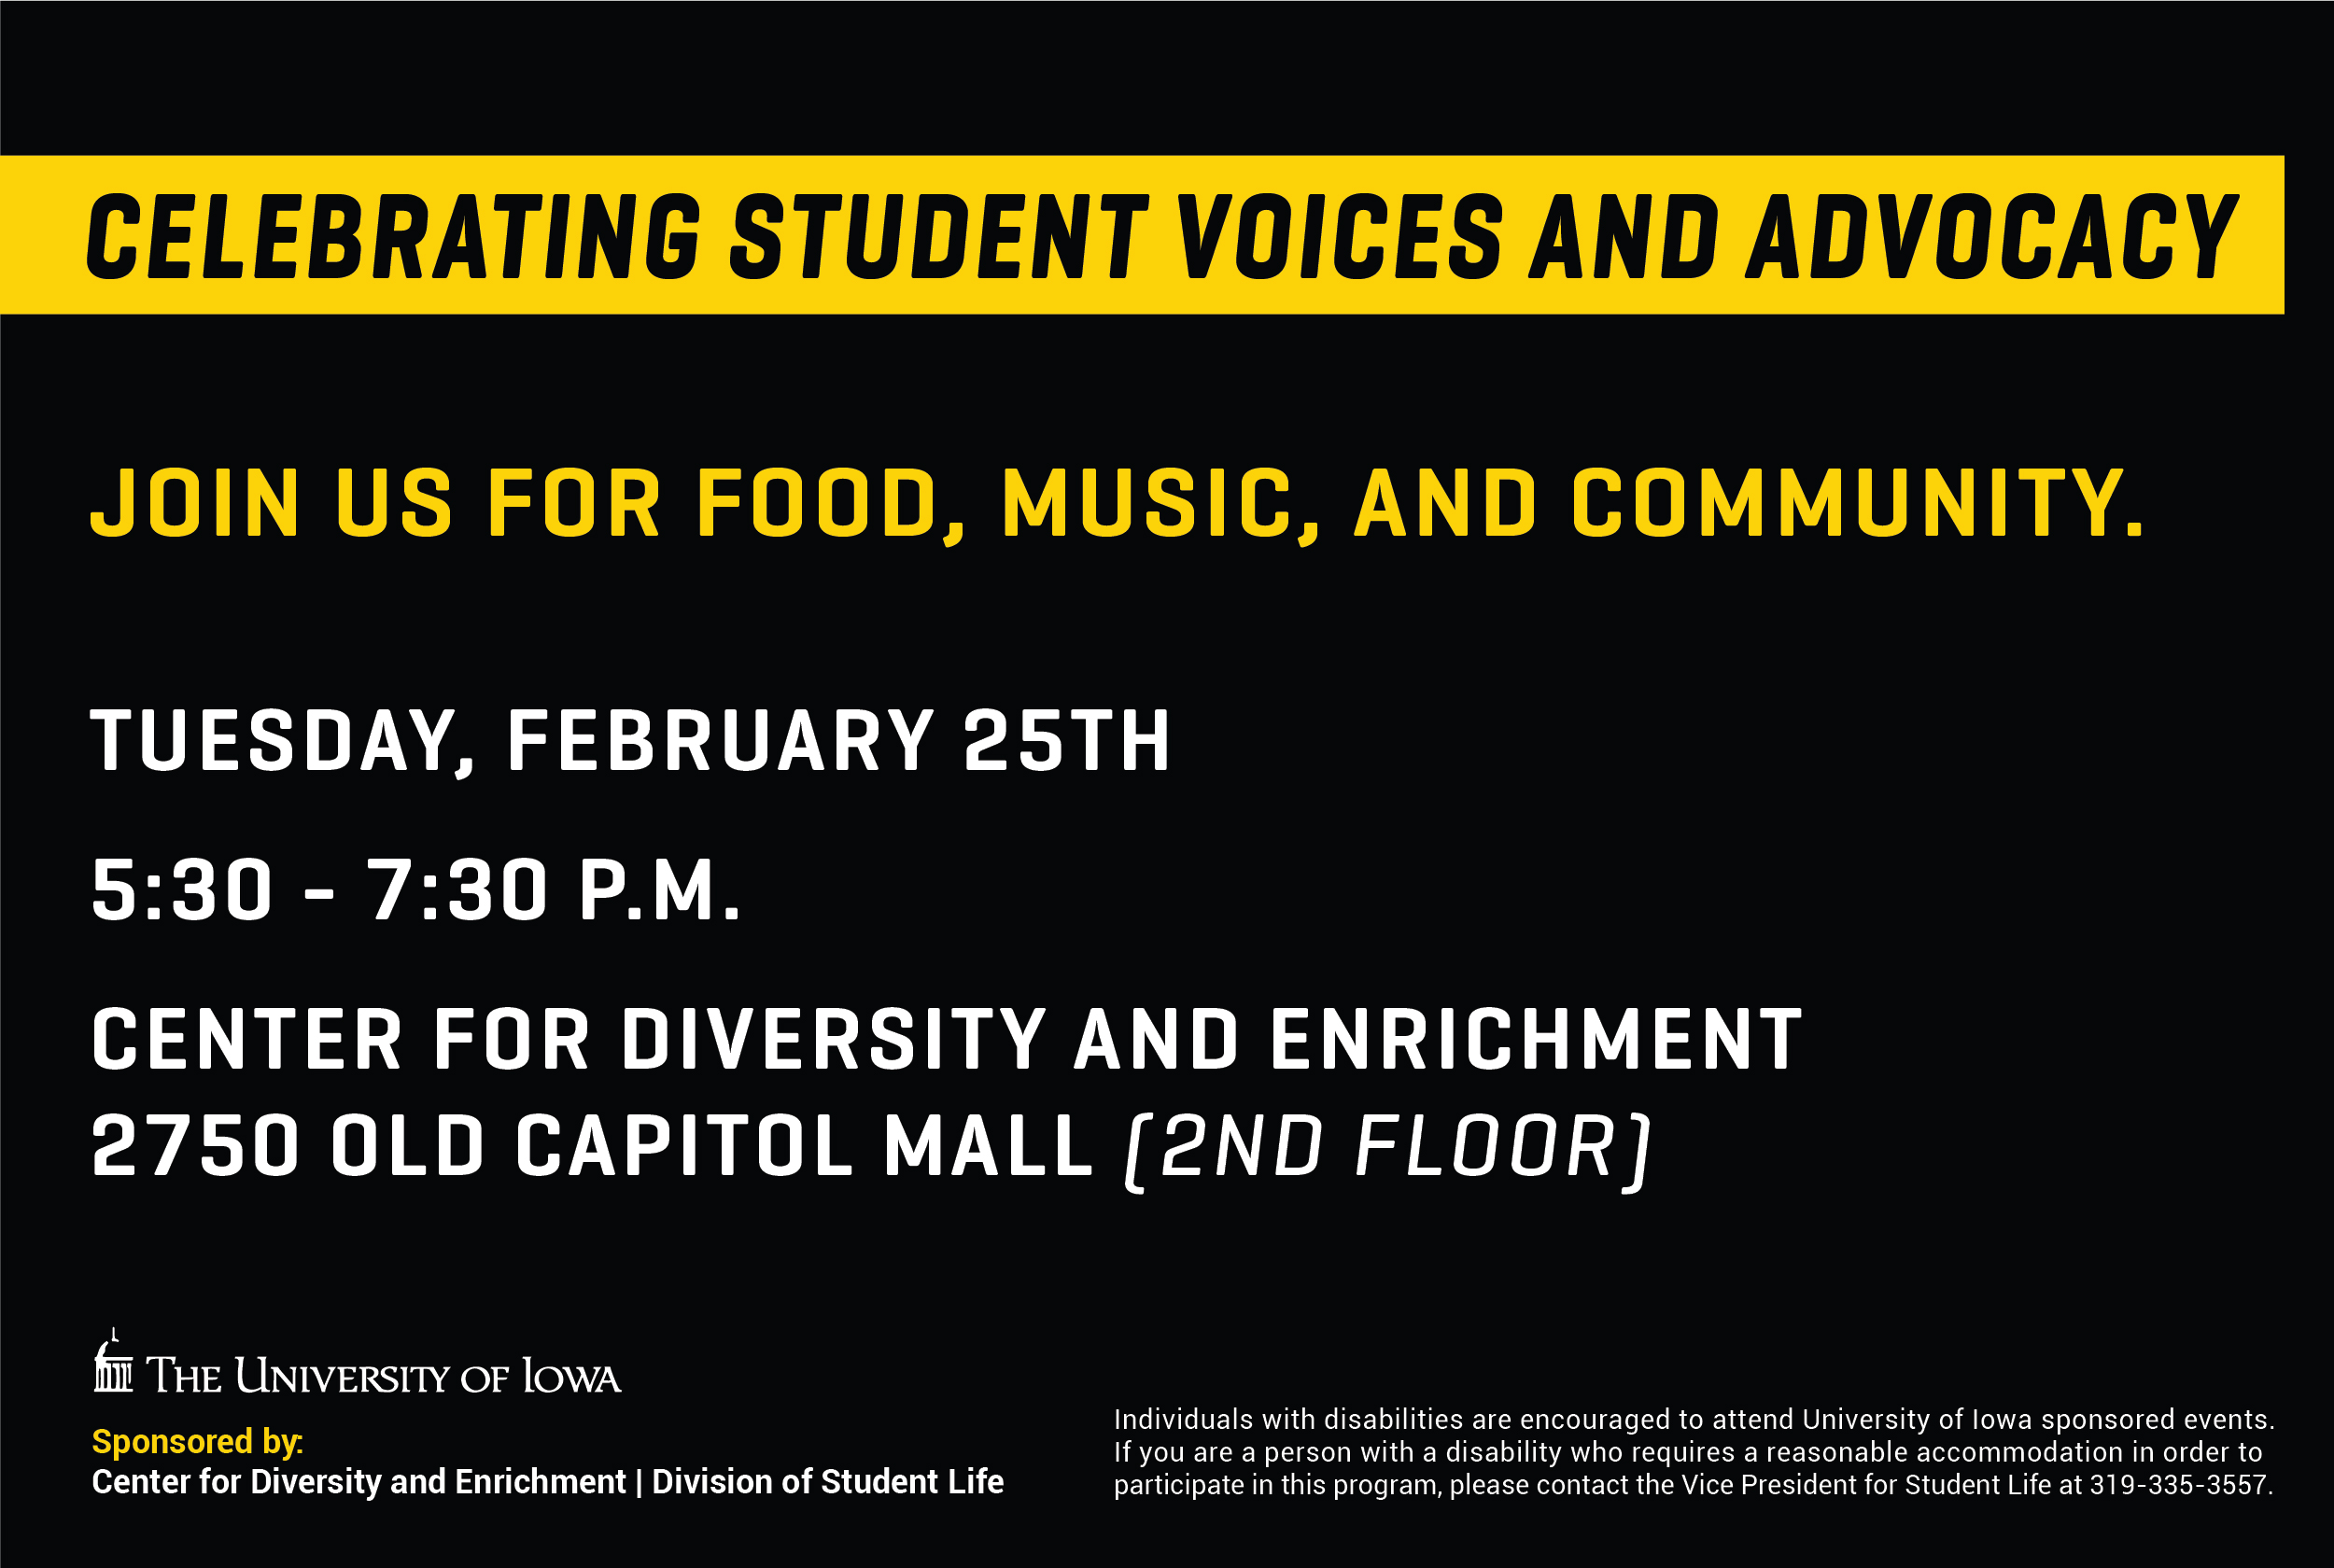 DoesUiowaLoveMe: Celebrating Student Voices and Advocacy  Join us for food, music, and community.  Tuesday, February 25th 5:30 p.m. - 7:30 p.m. Division of Diversity, Equity and Inclusion, Old Capital Mall